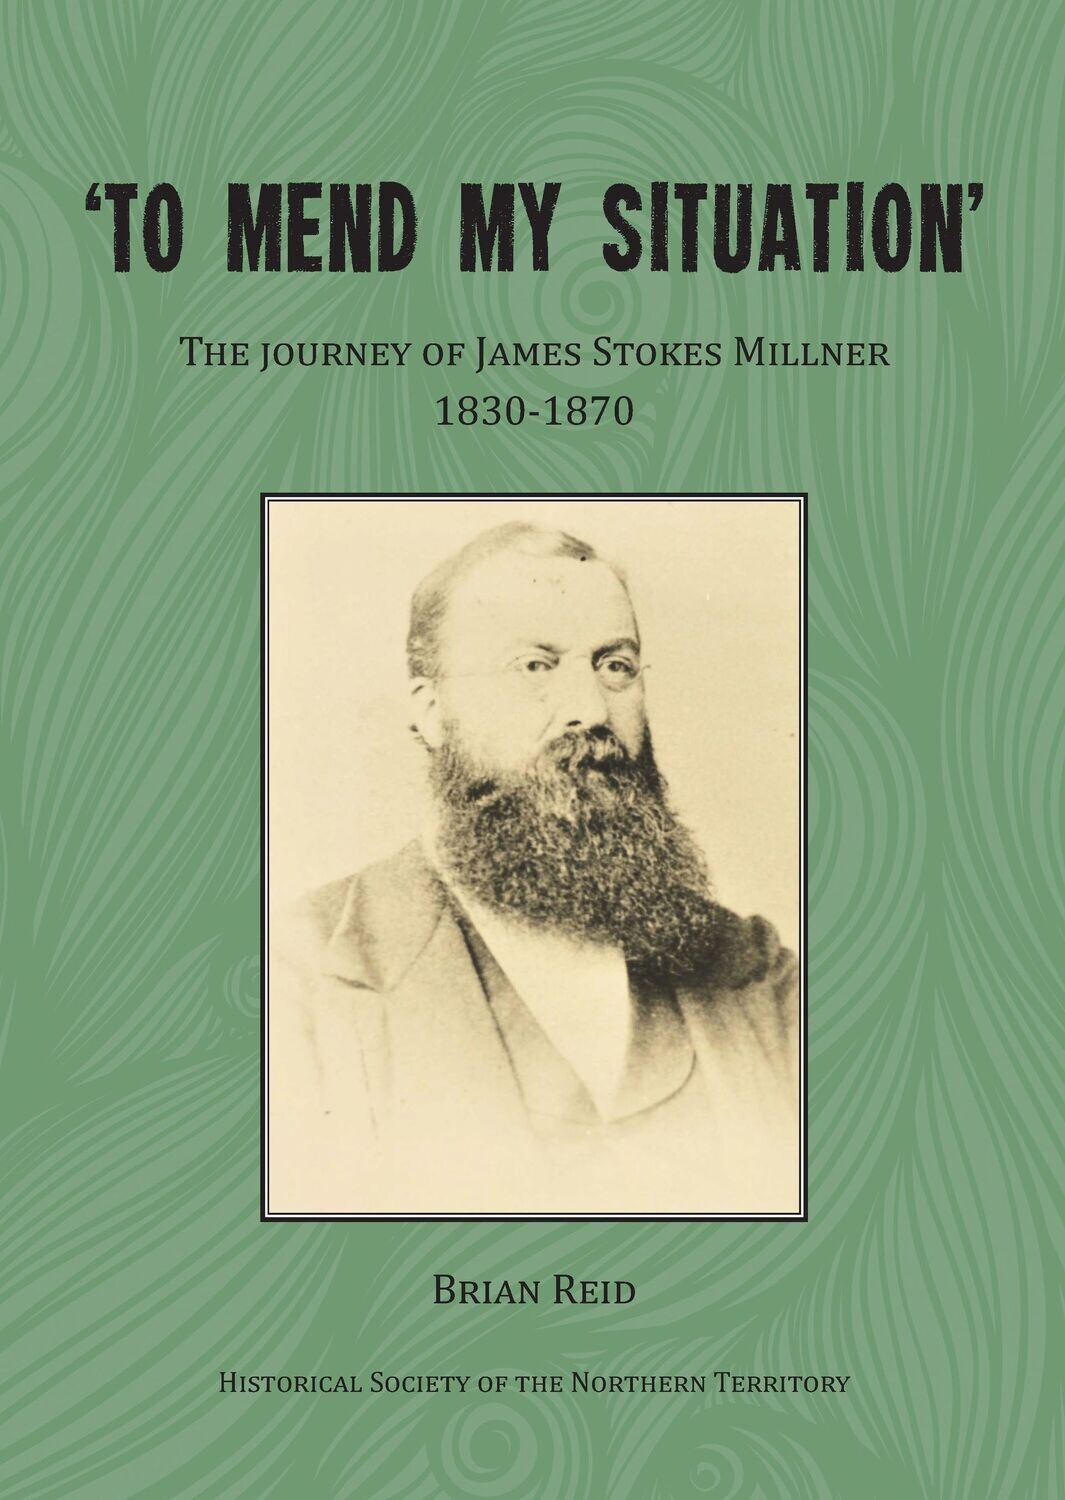 'To Mend My Situation'; The Journey of James Stokes Millner 1830-1875